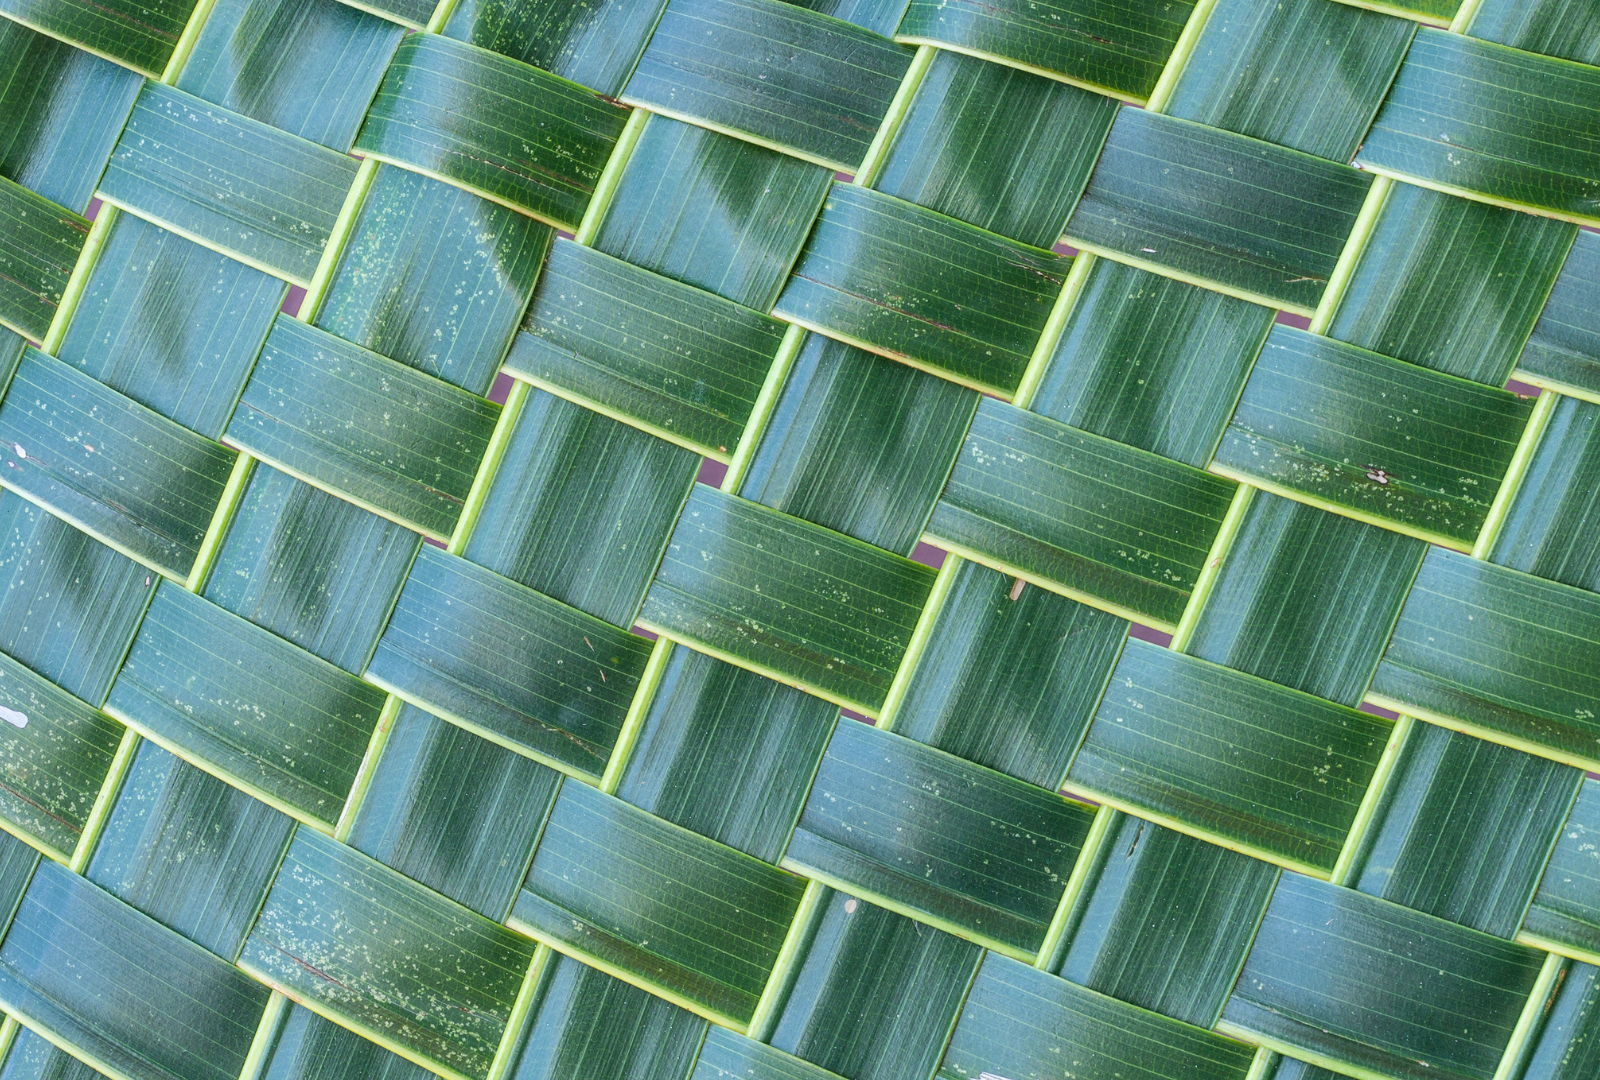 coconut fronds woven together